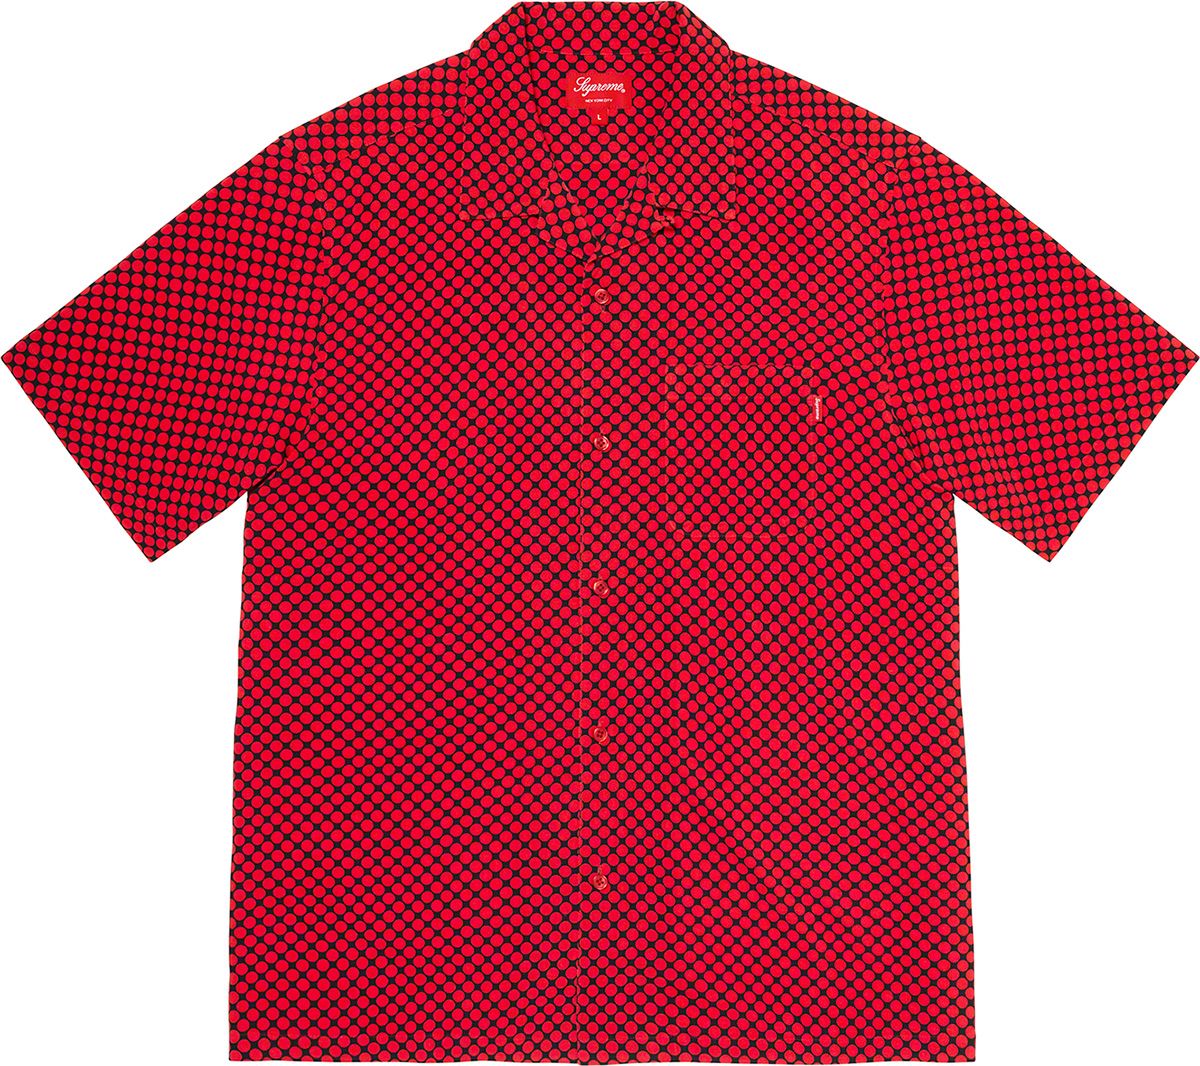 Receipts Rayon S/S Shirt - Fall/Winter 2020 Preview – Supreme